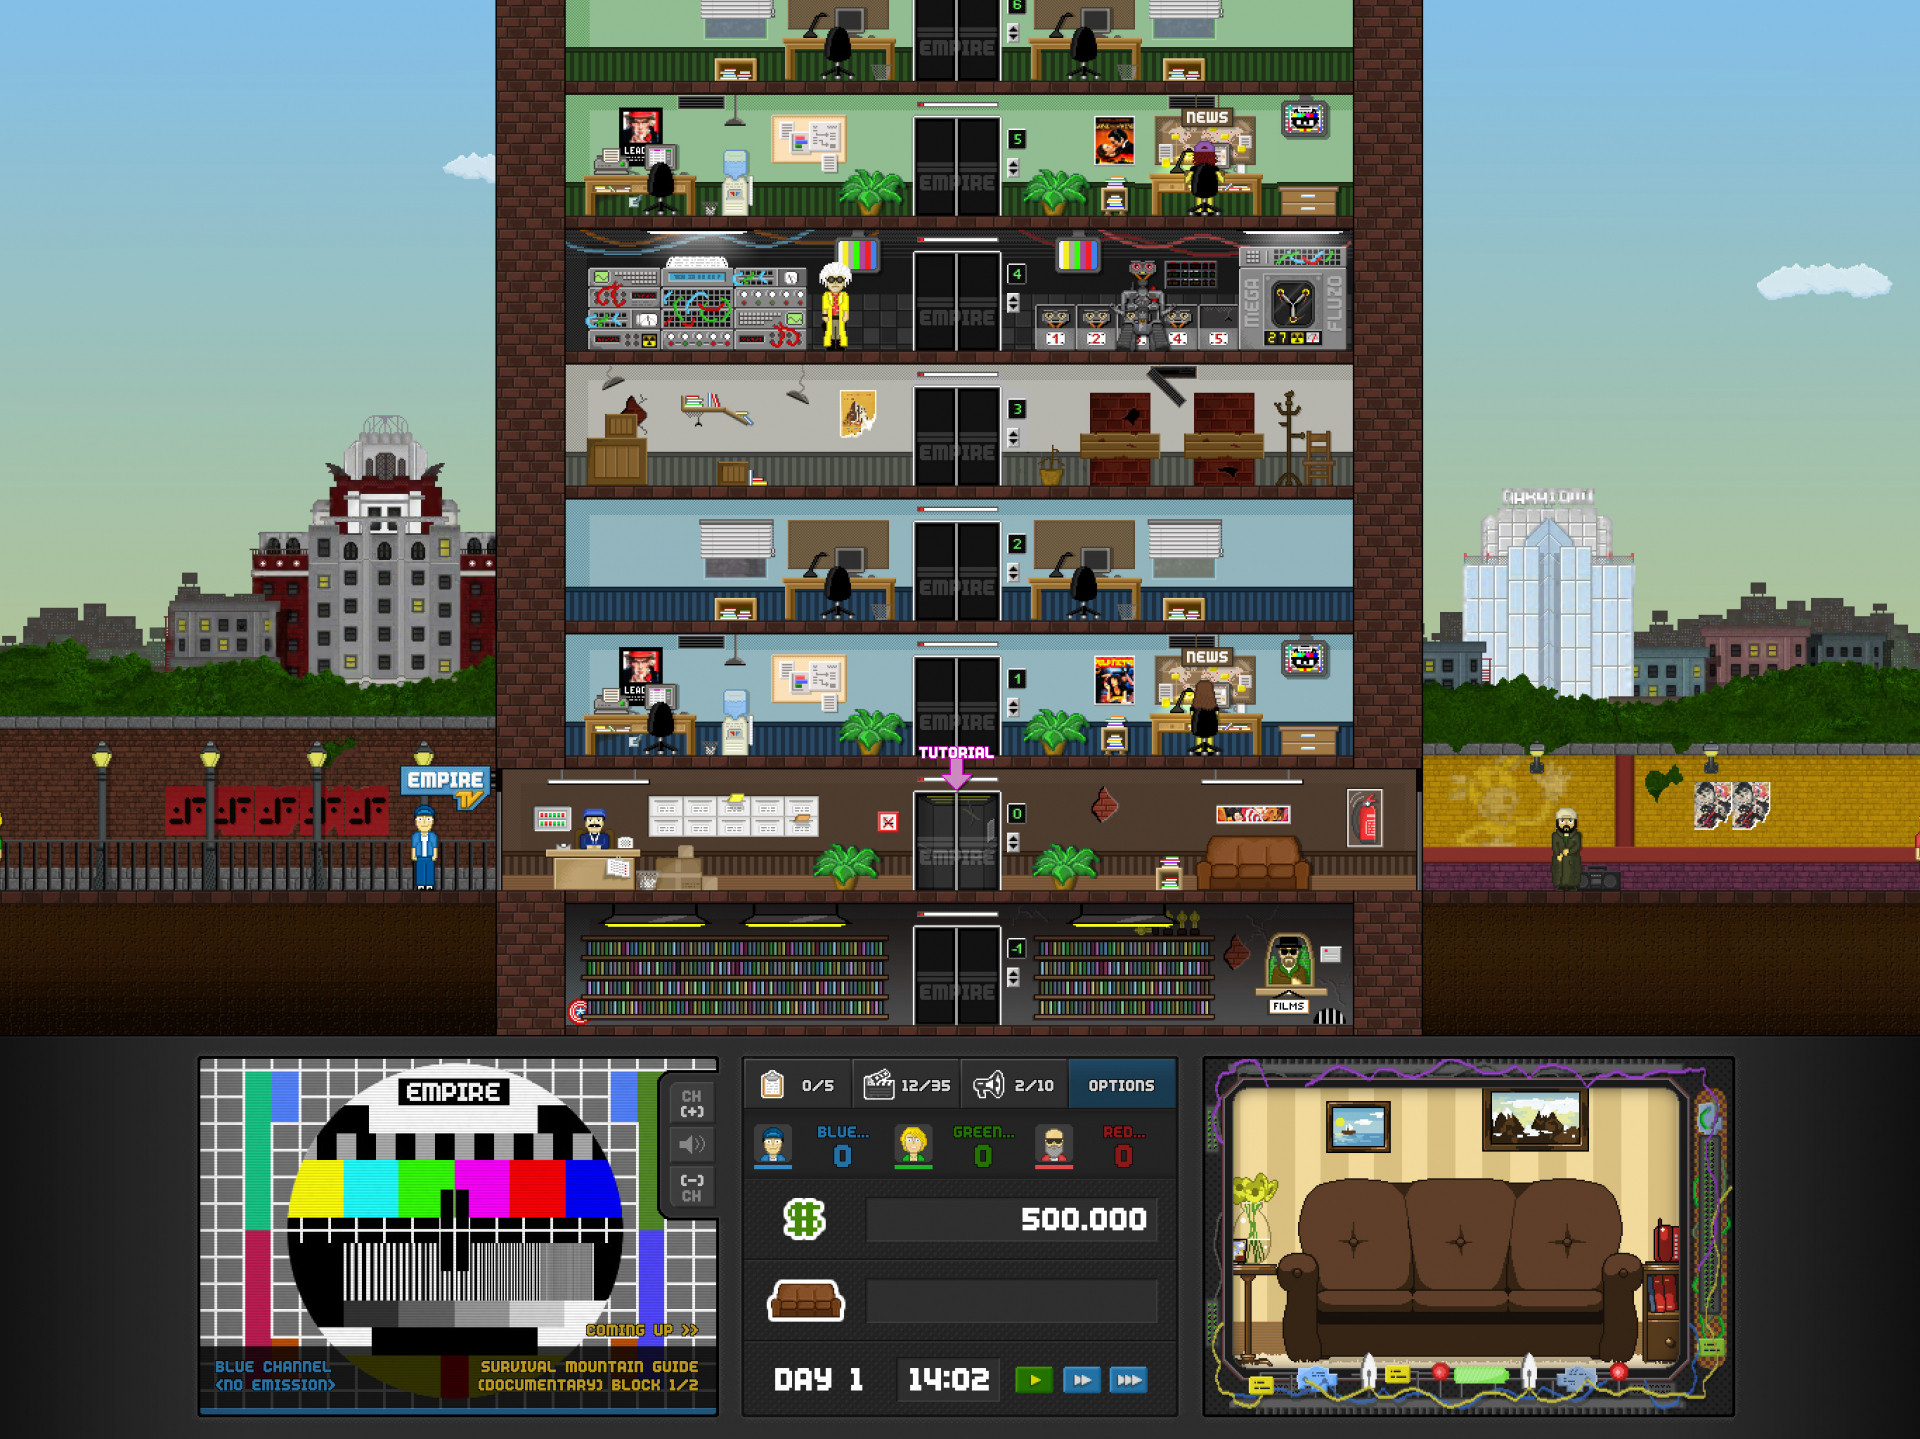 Mod games tycoon